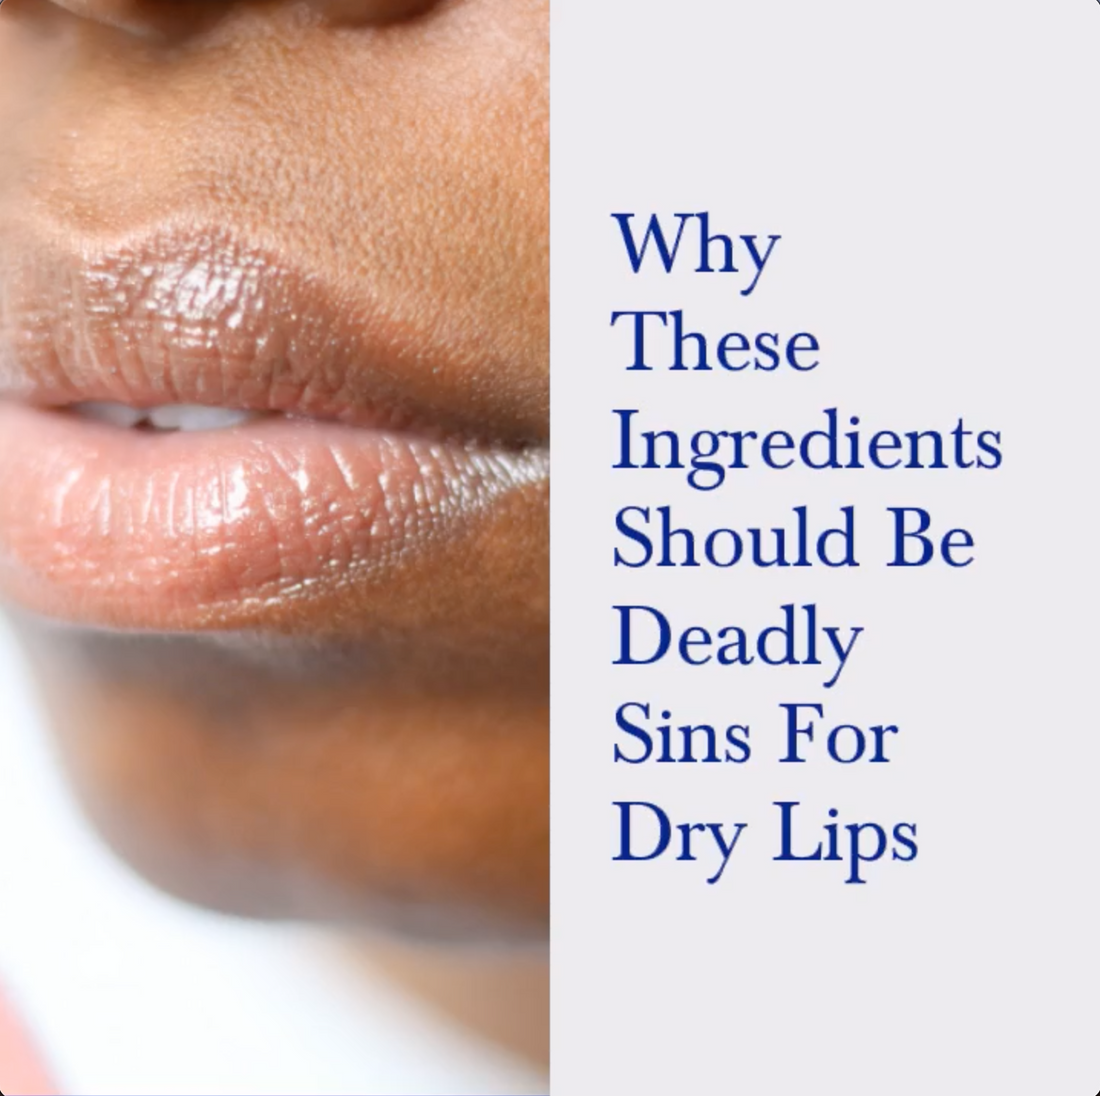 Why These Ingredients Should Be Deadly Sins For Dry Lips